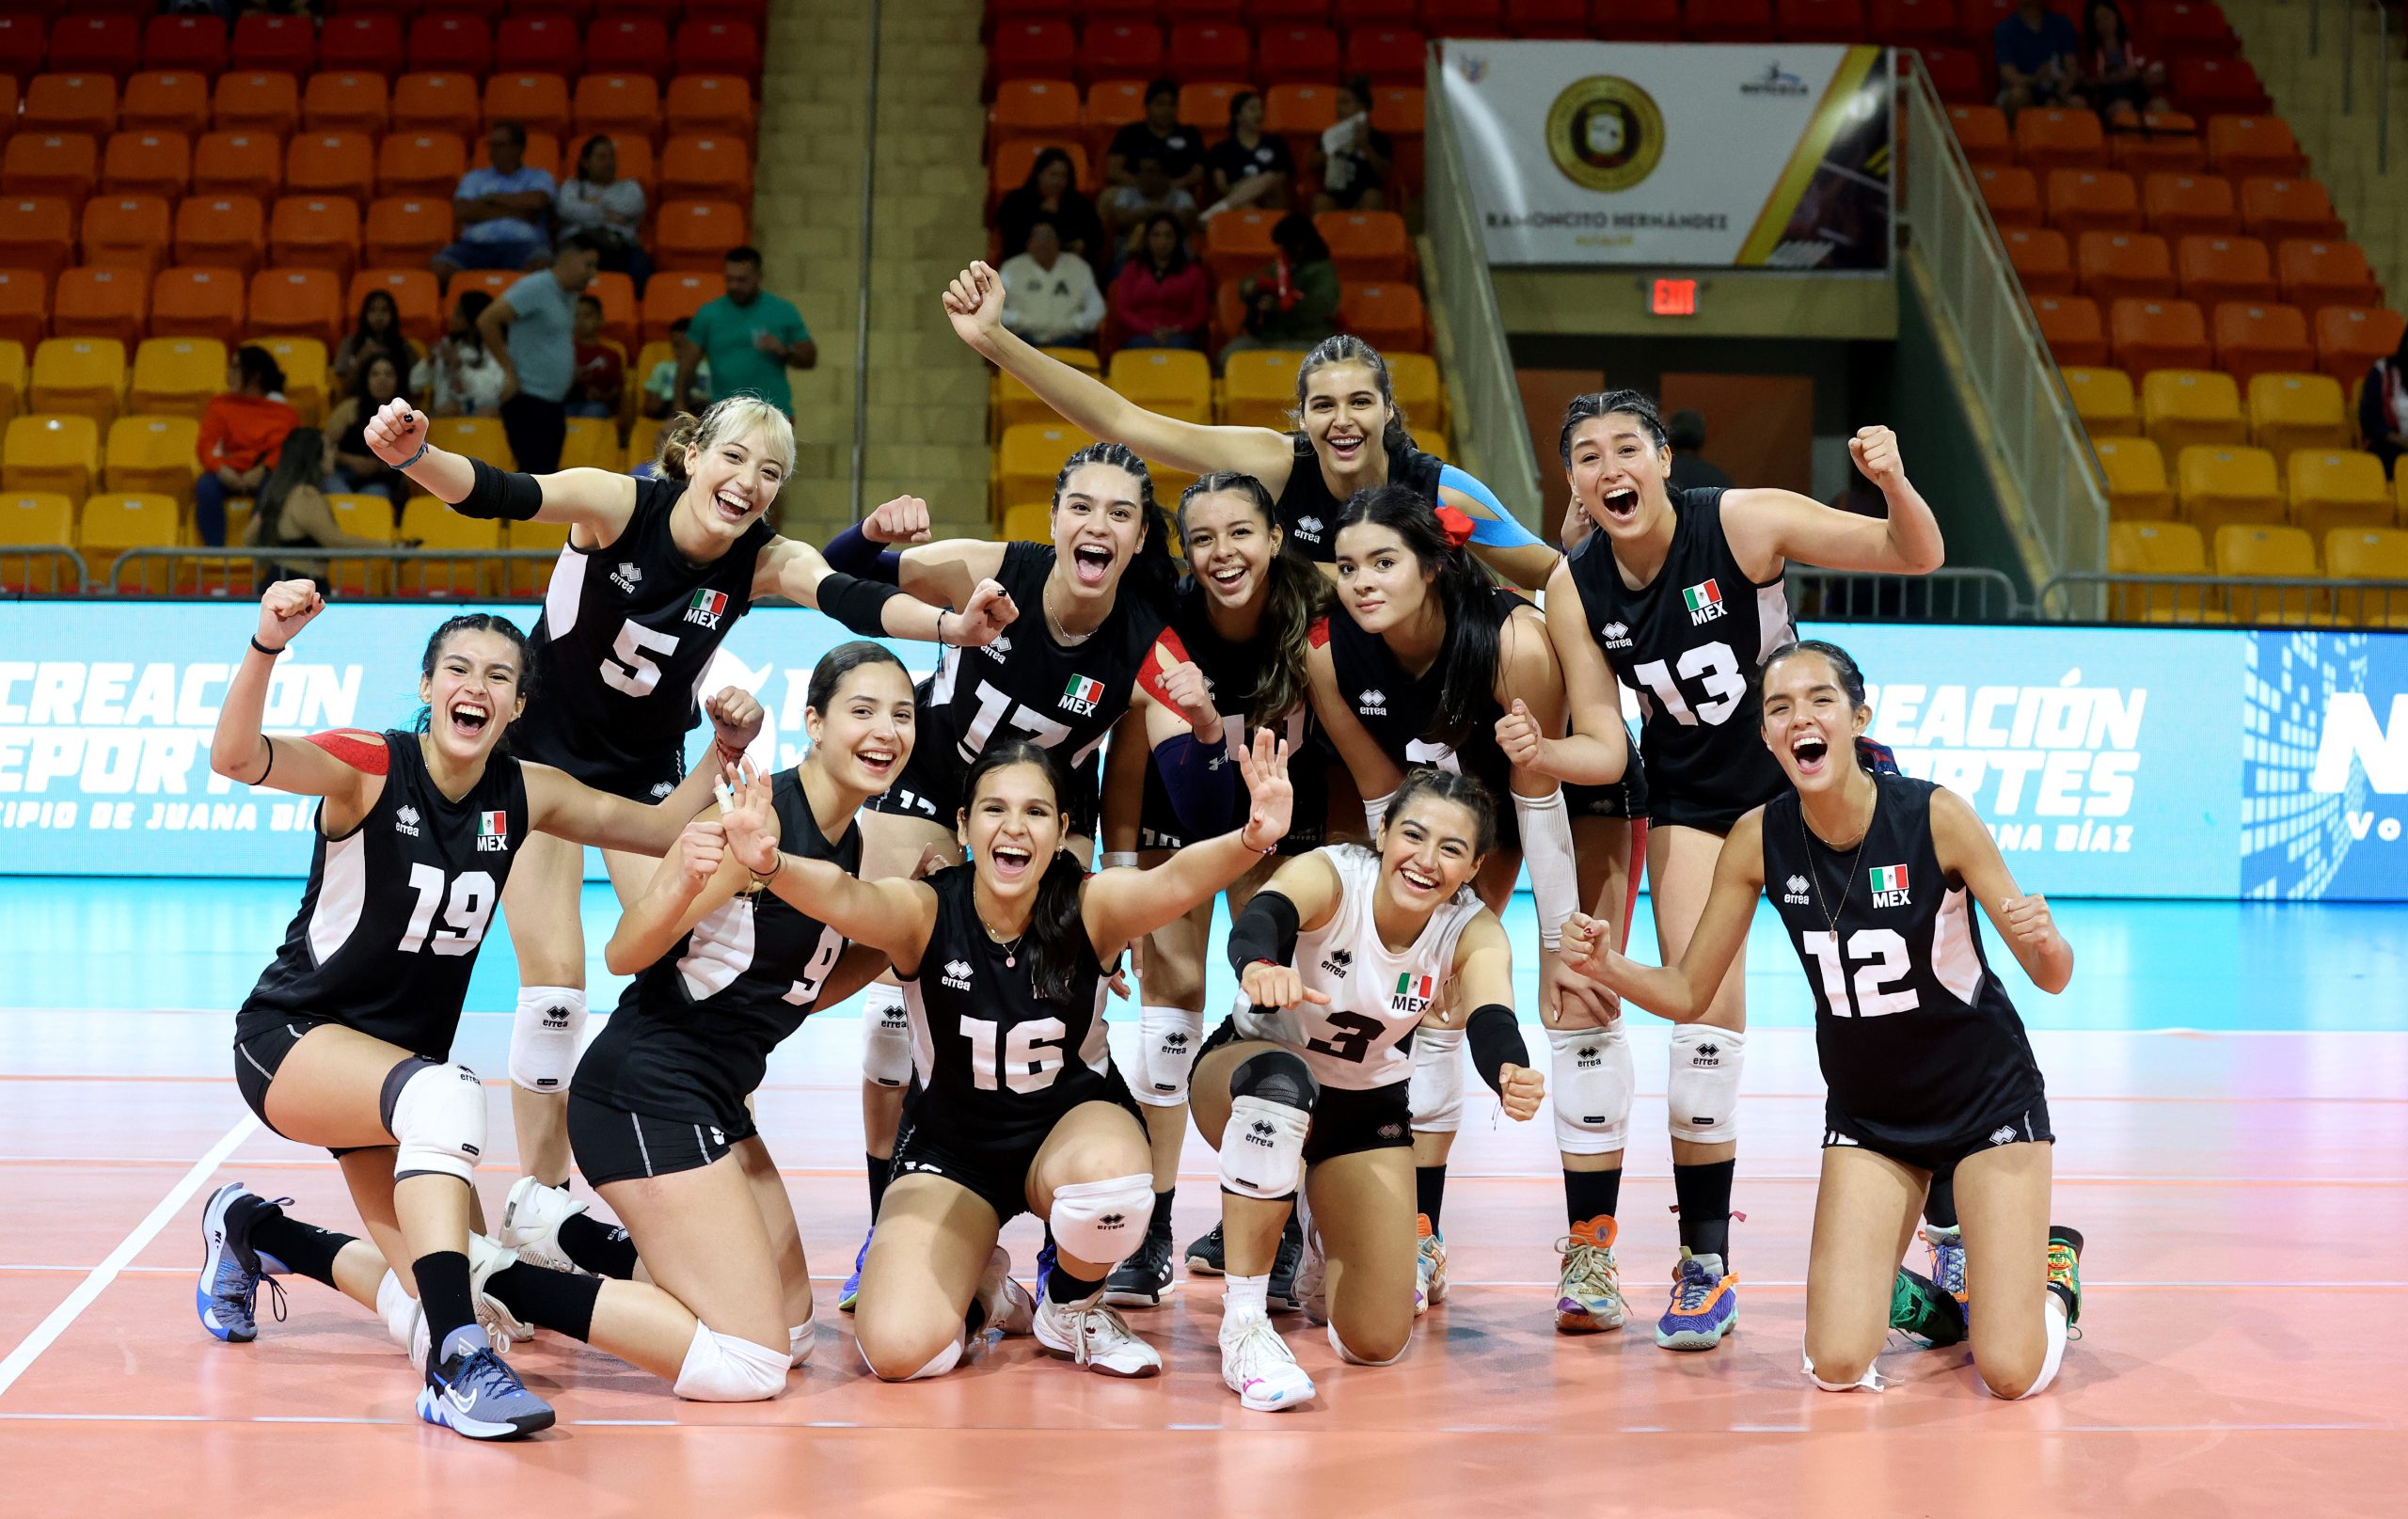 Mexico reaches semifinals in dramatic five set win over Canada